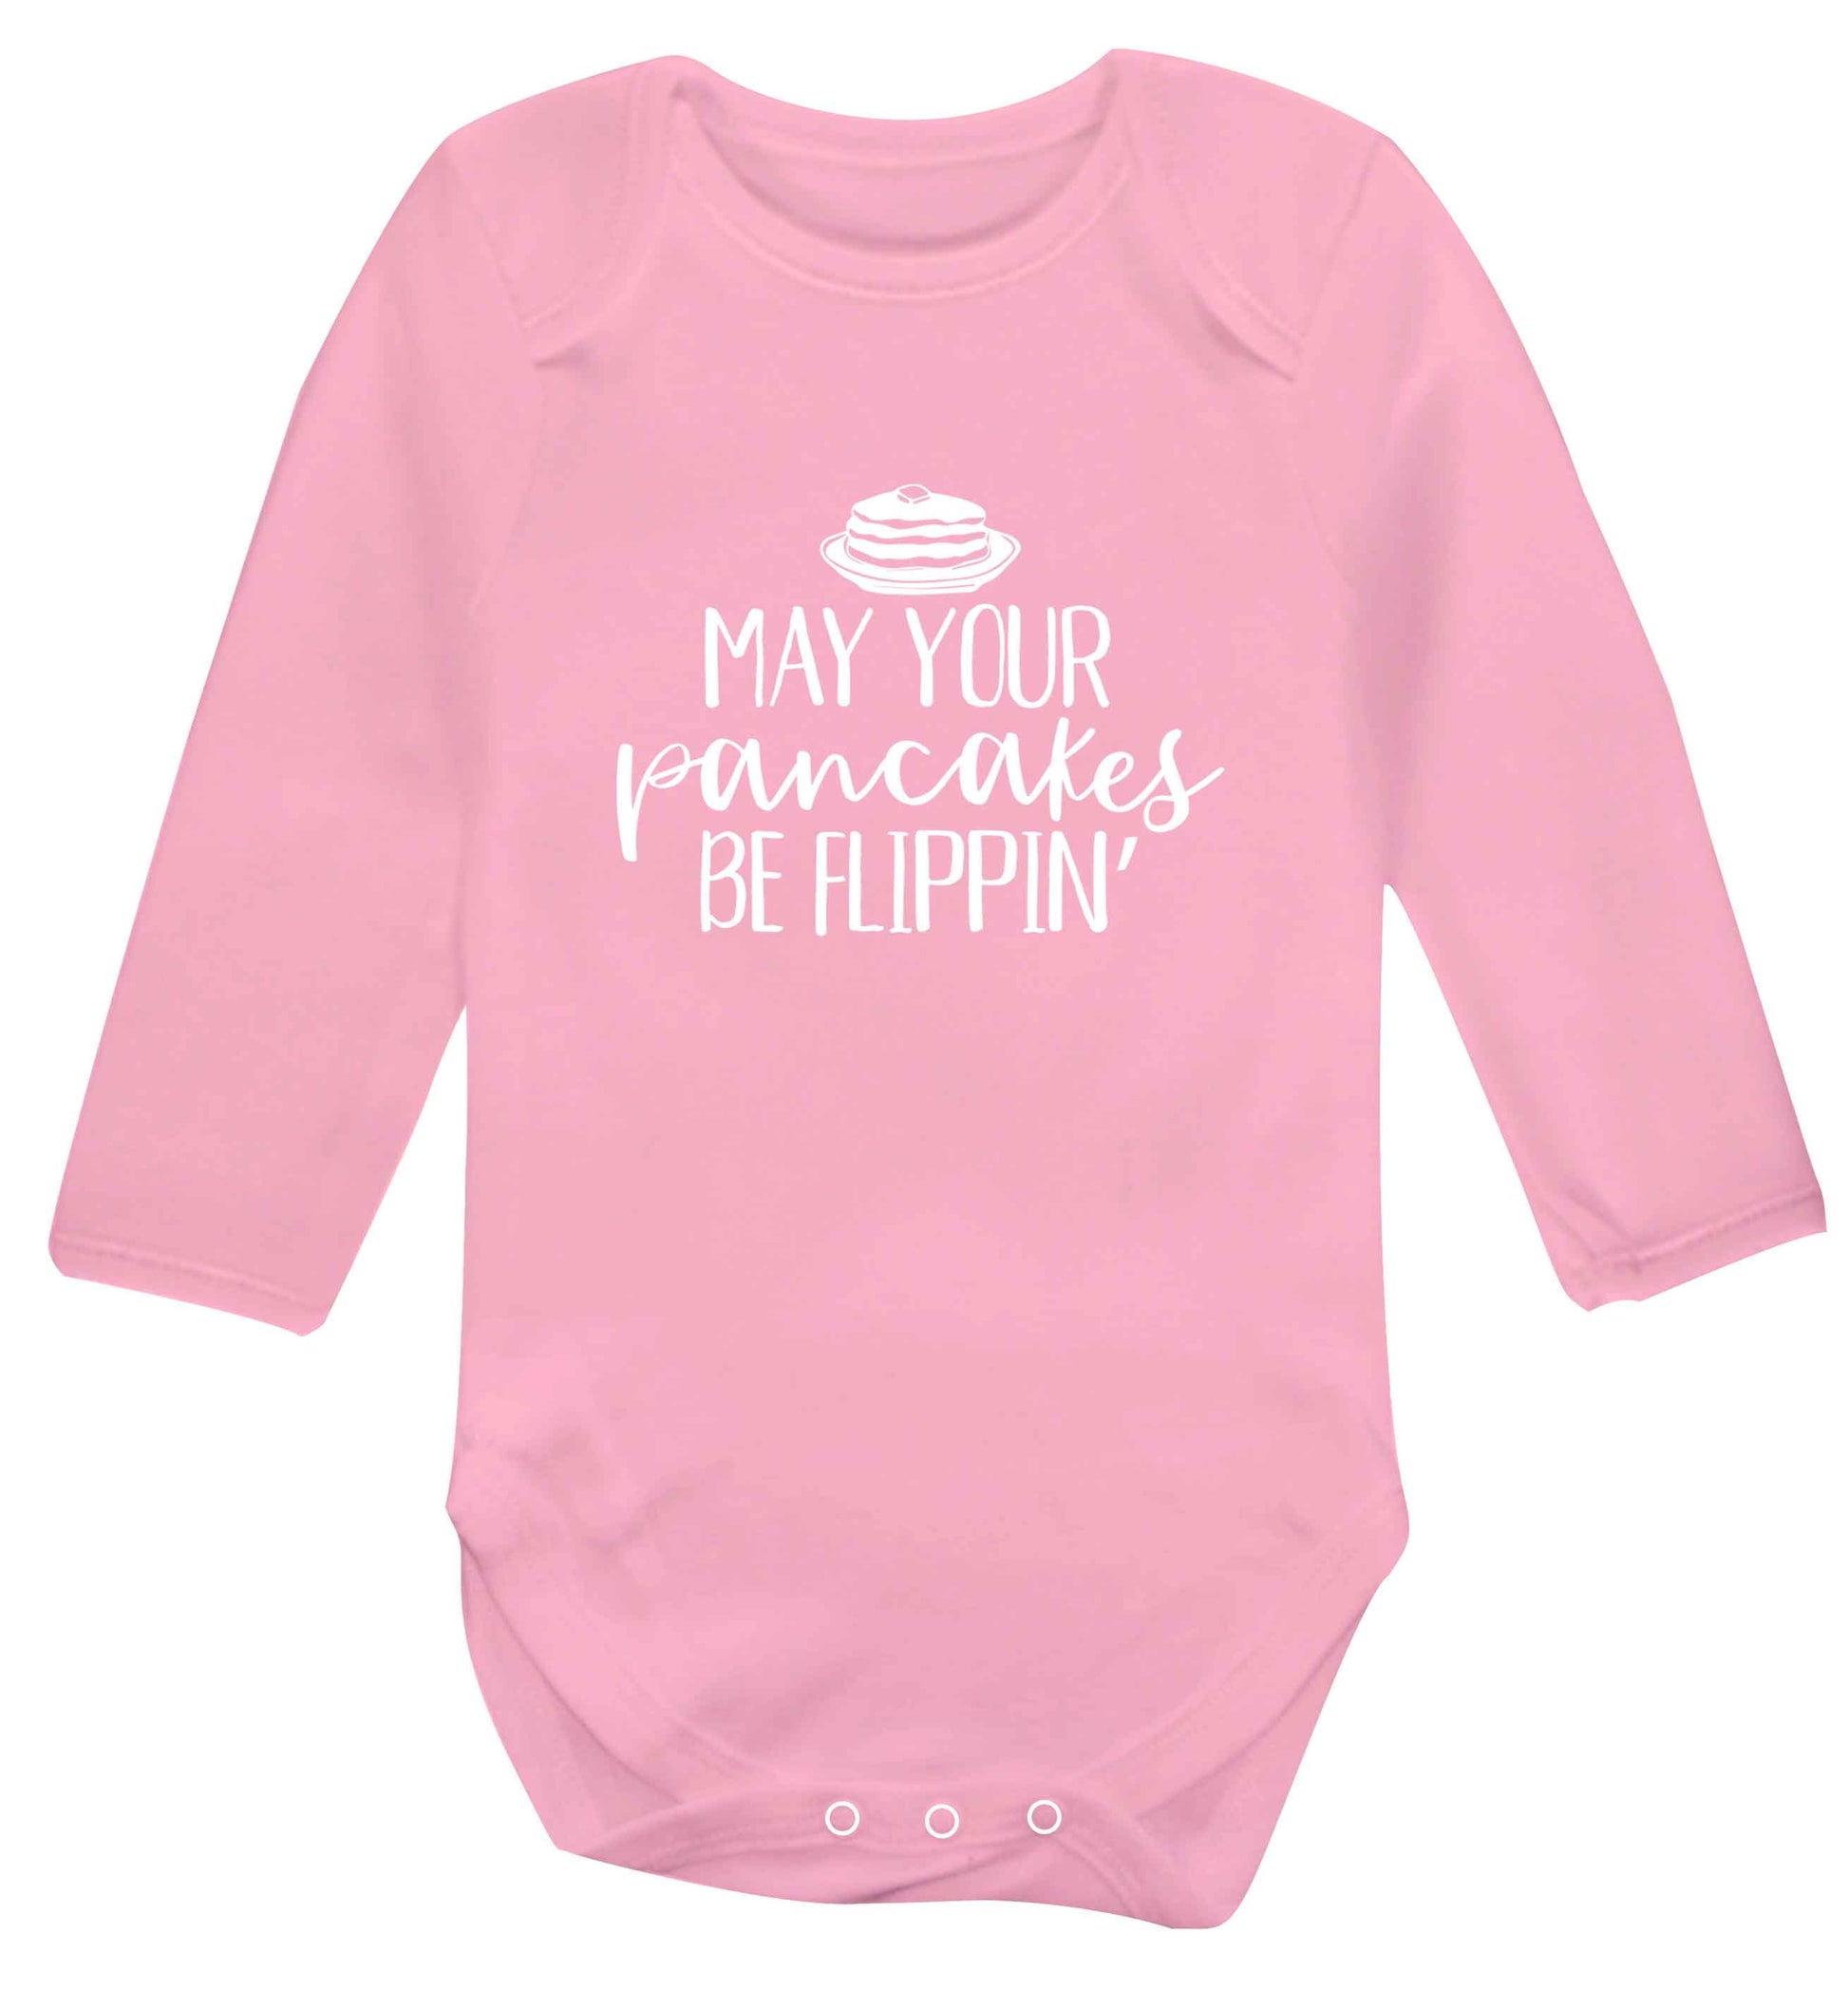 May your pancakes be flippin' baby vest long sleeved pale pink 6-12 months